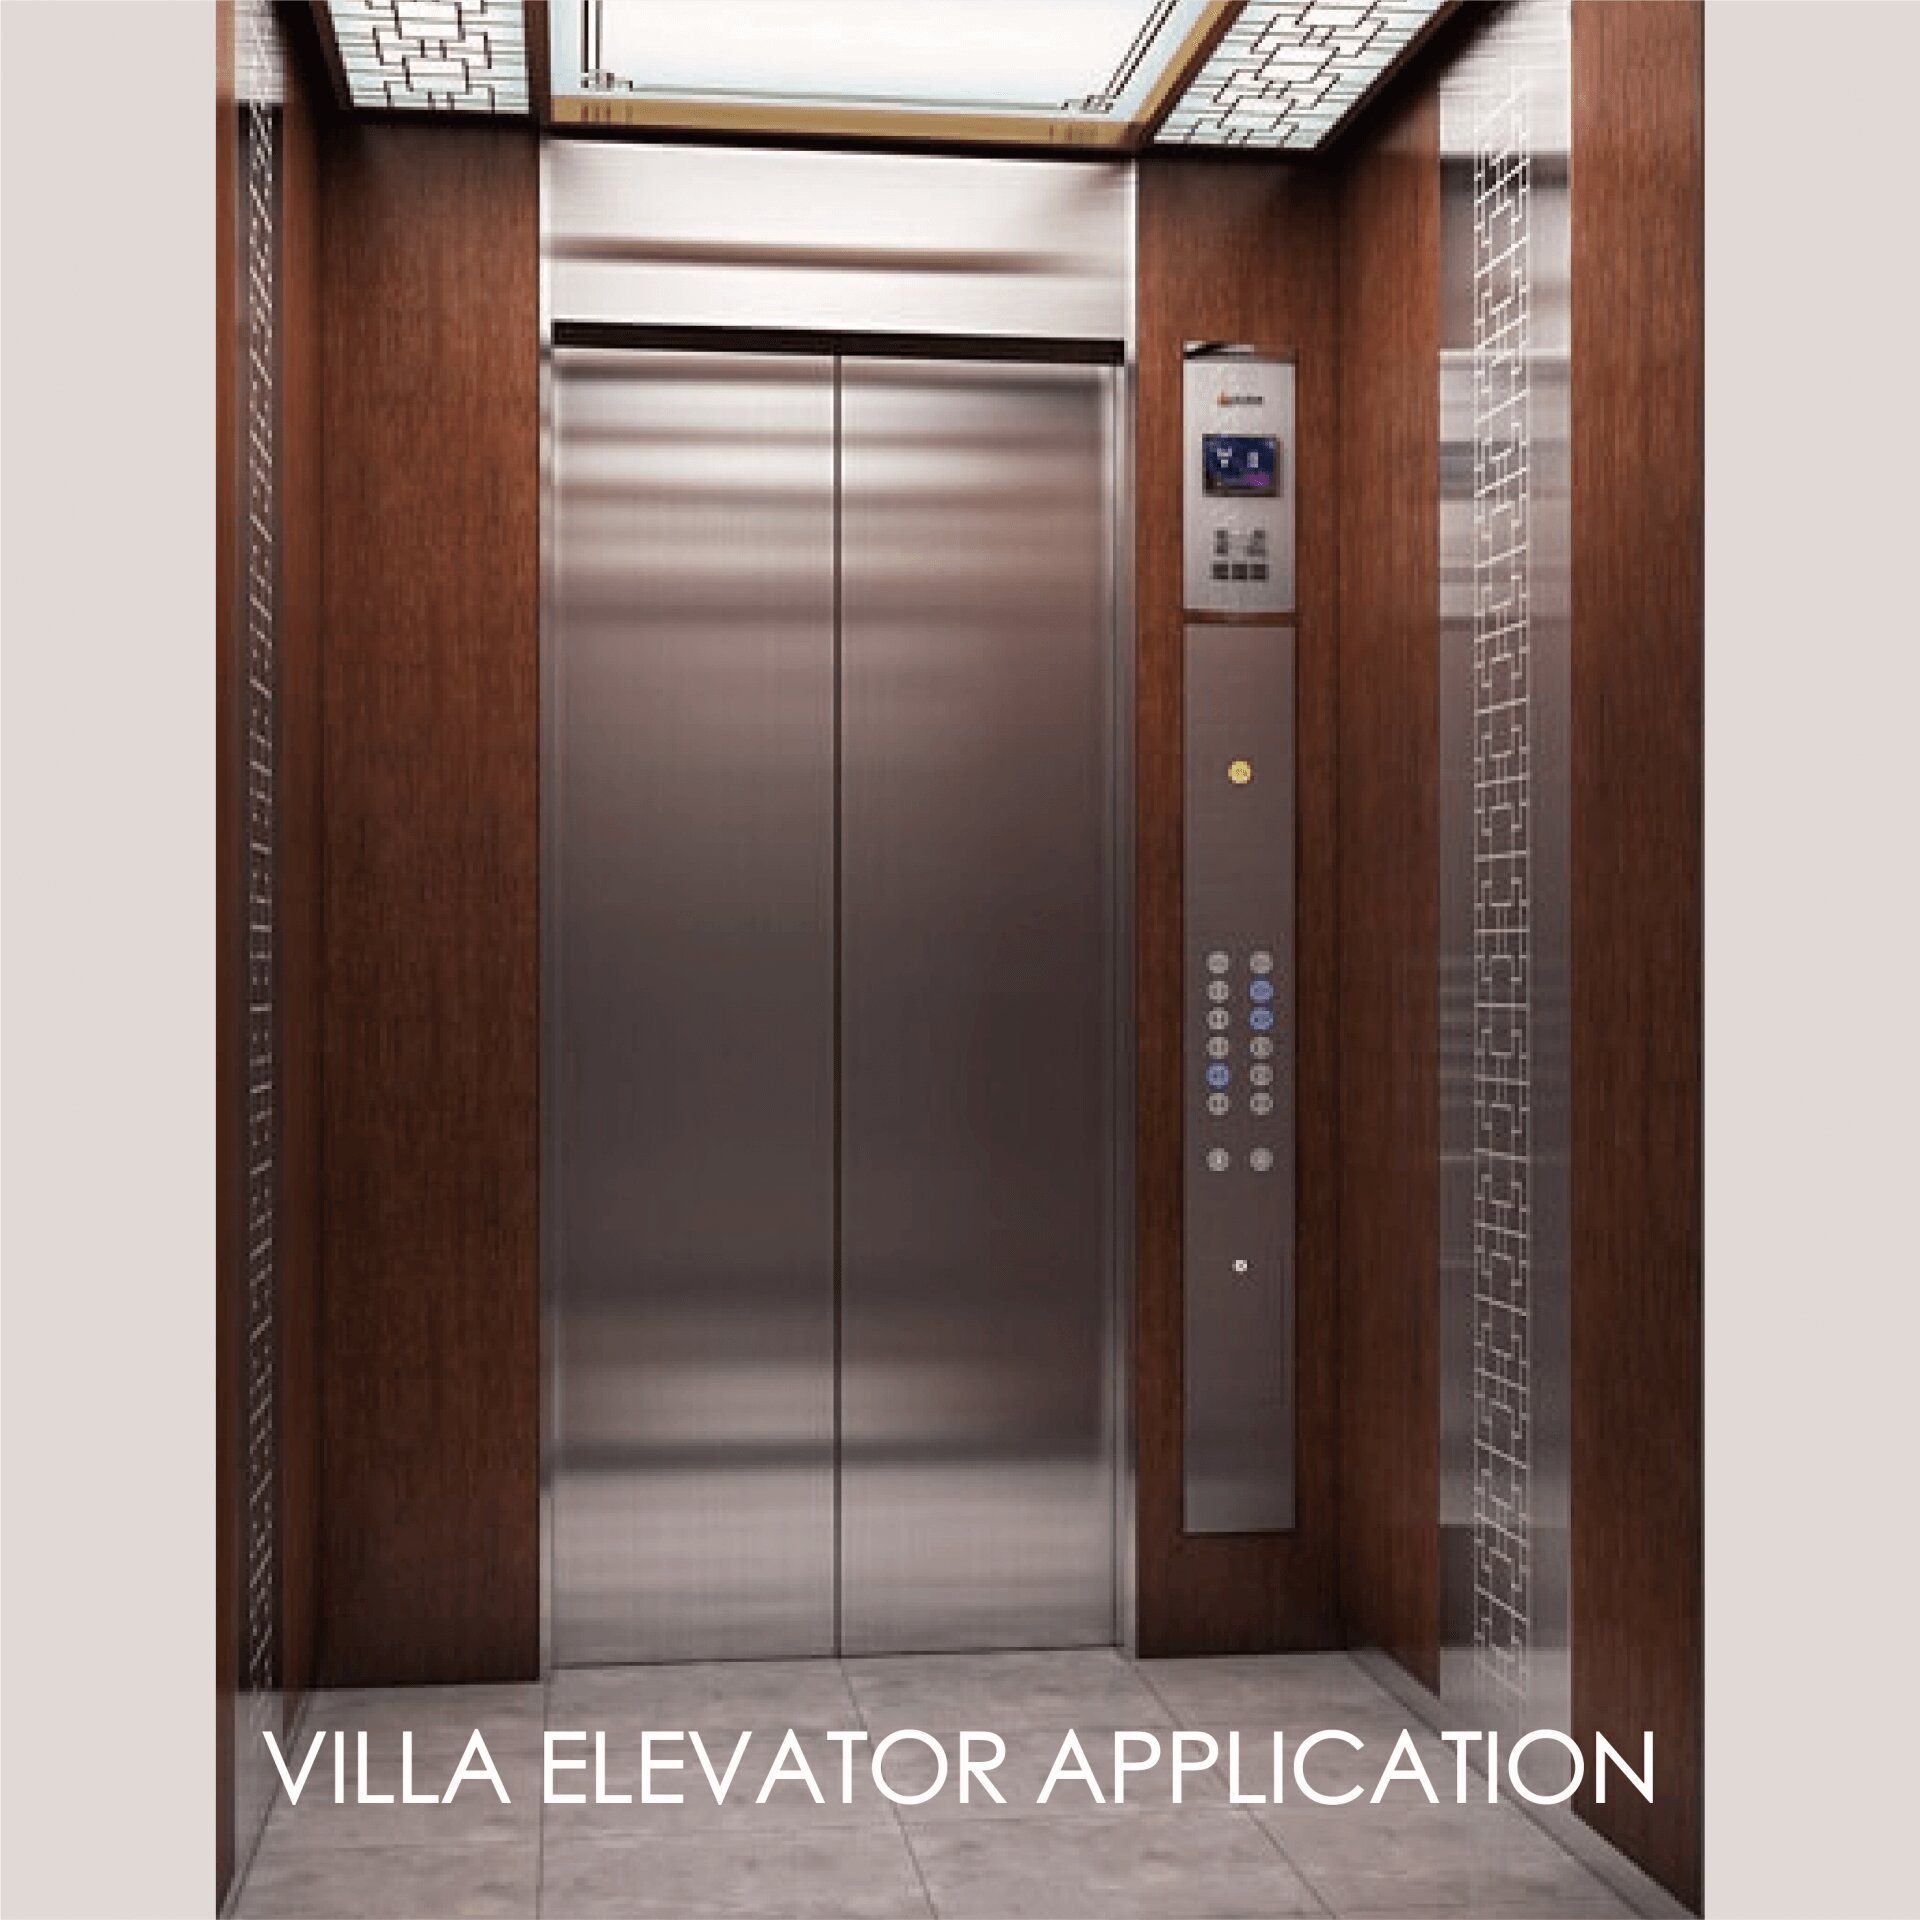 Using laminated metal to decorate the elevator door panel can create the aesthetics and durability